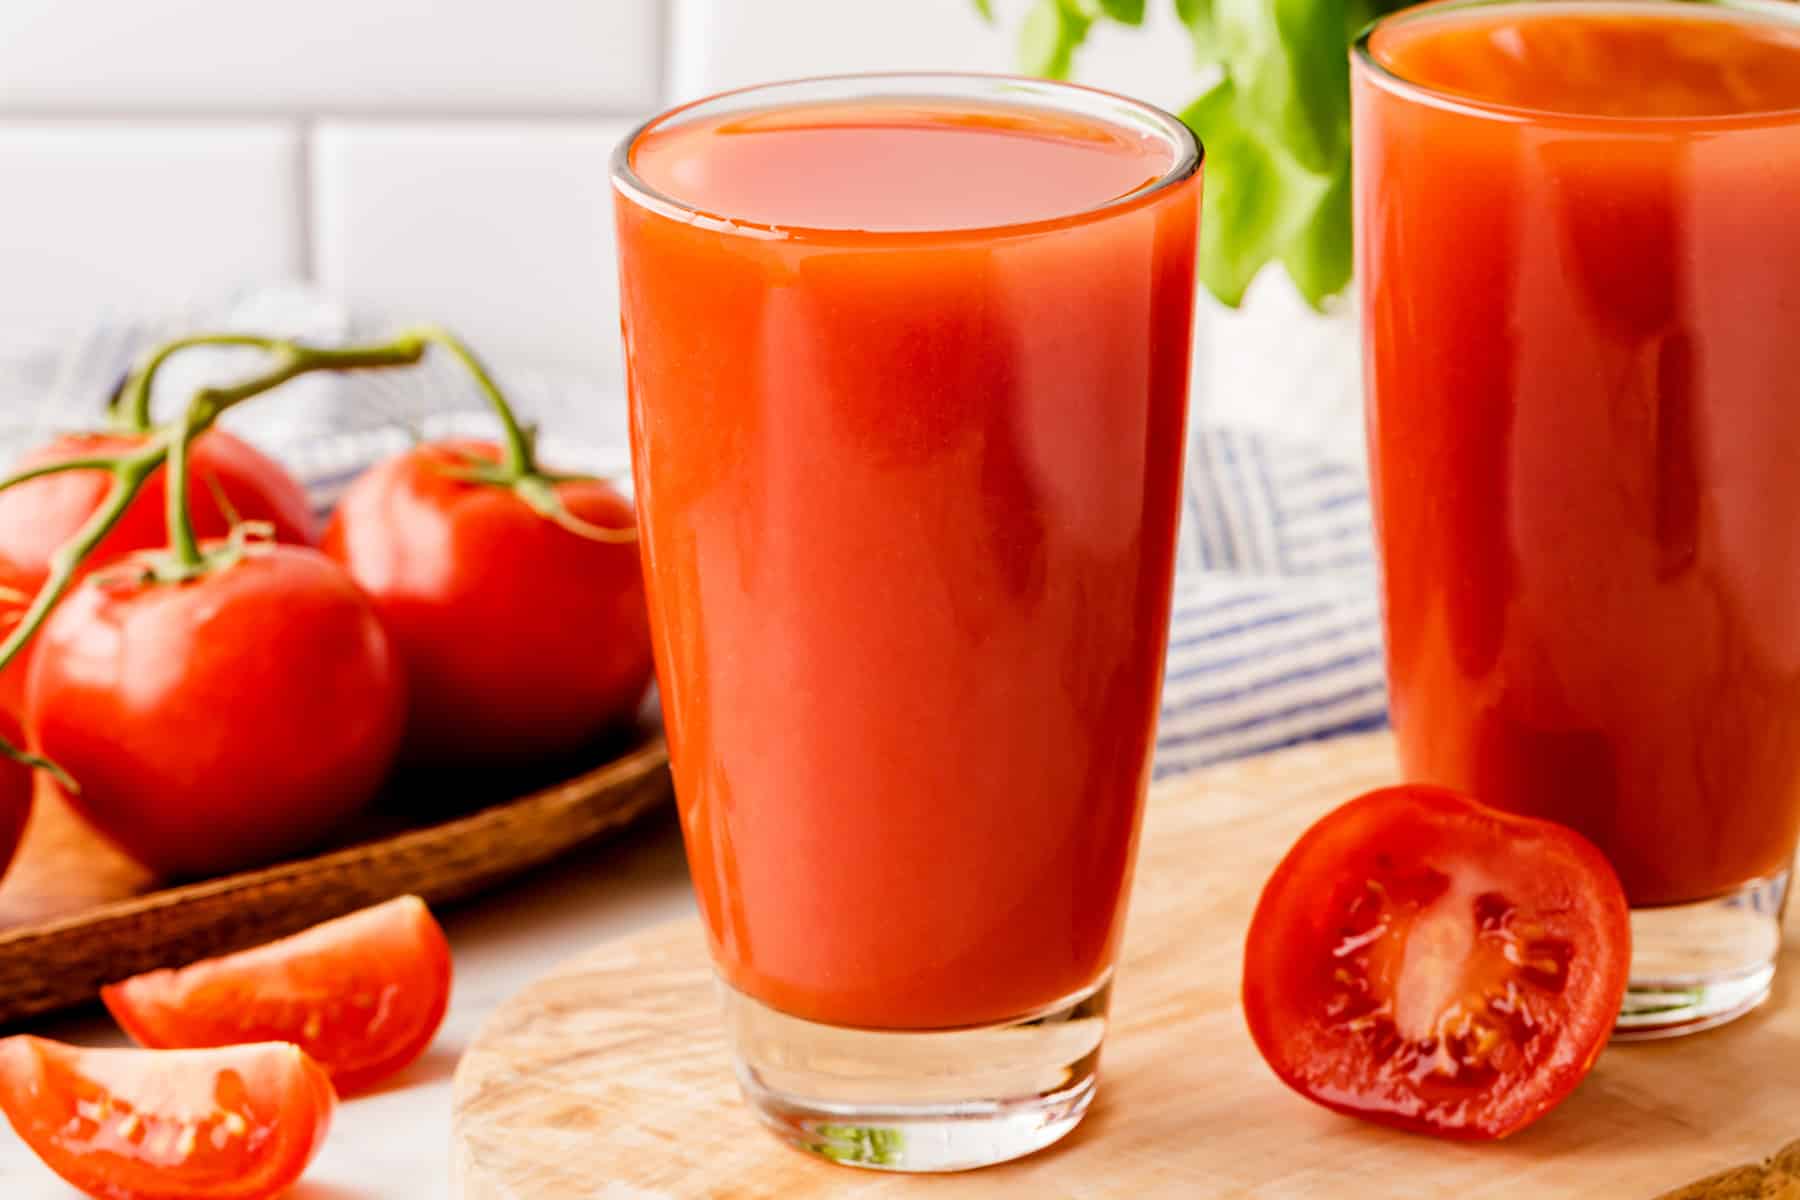 Horizontal picture of full glasses of tomato juice and fresh tomatoes. 